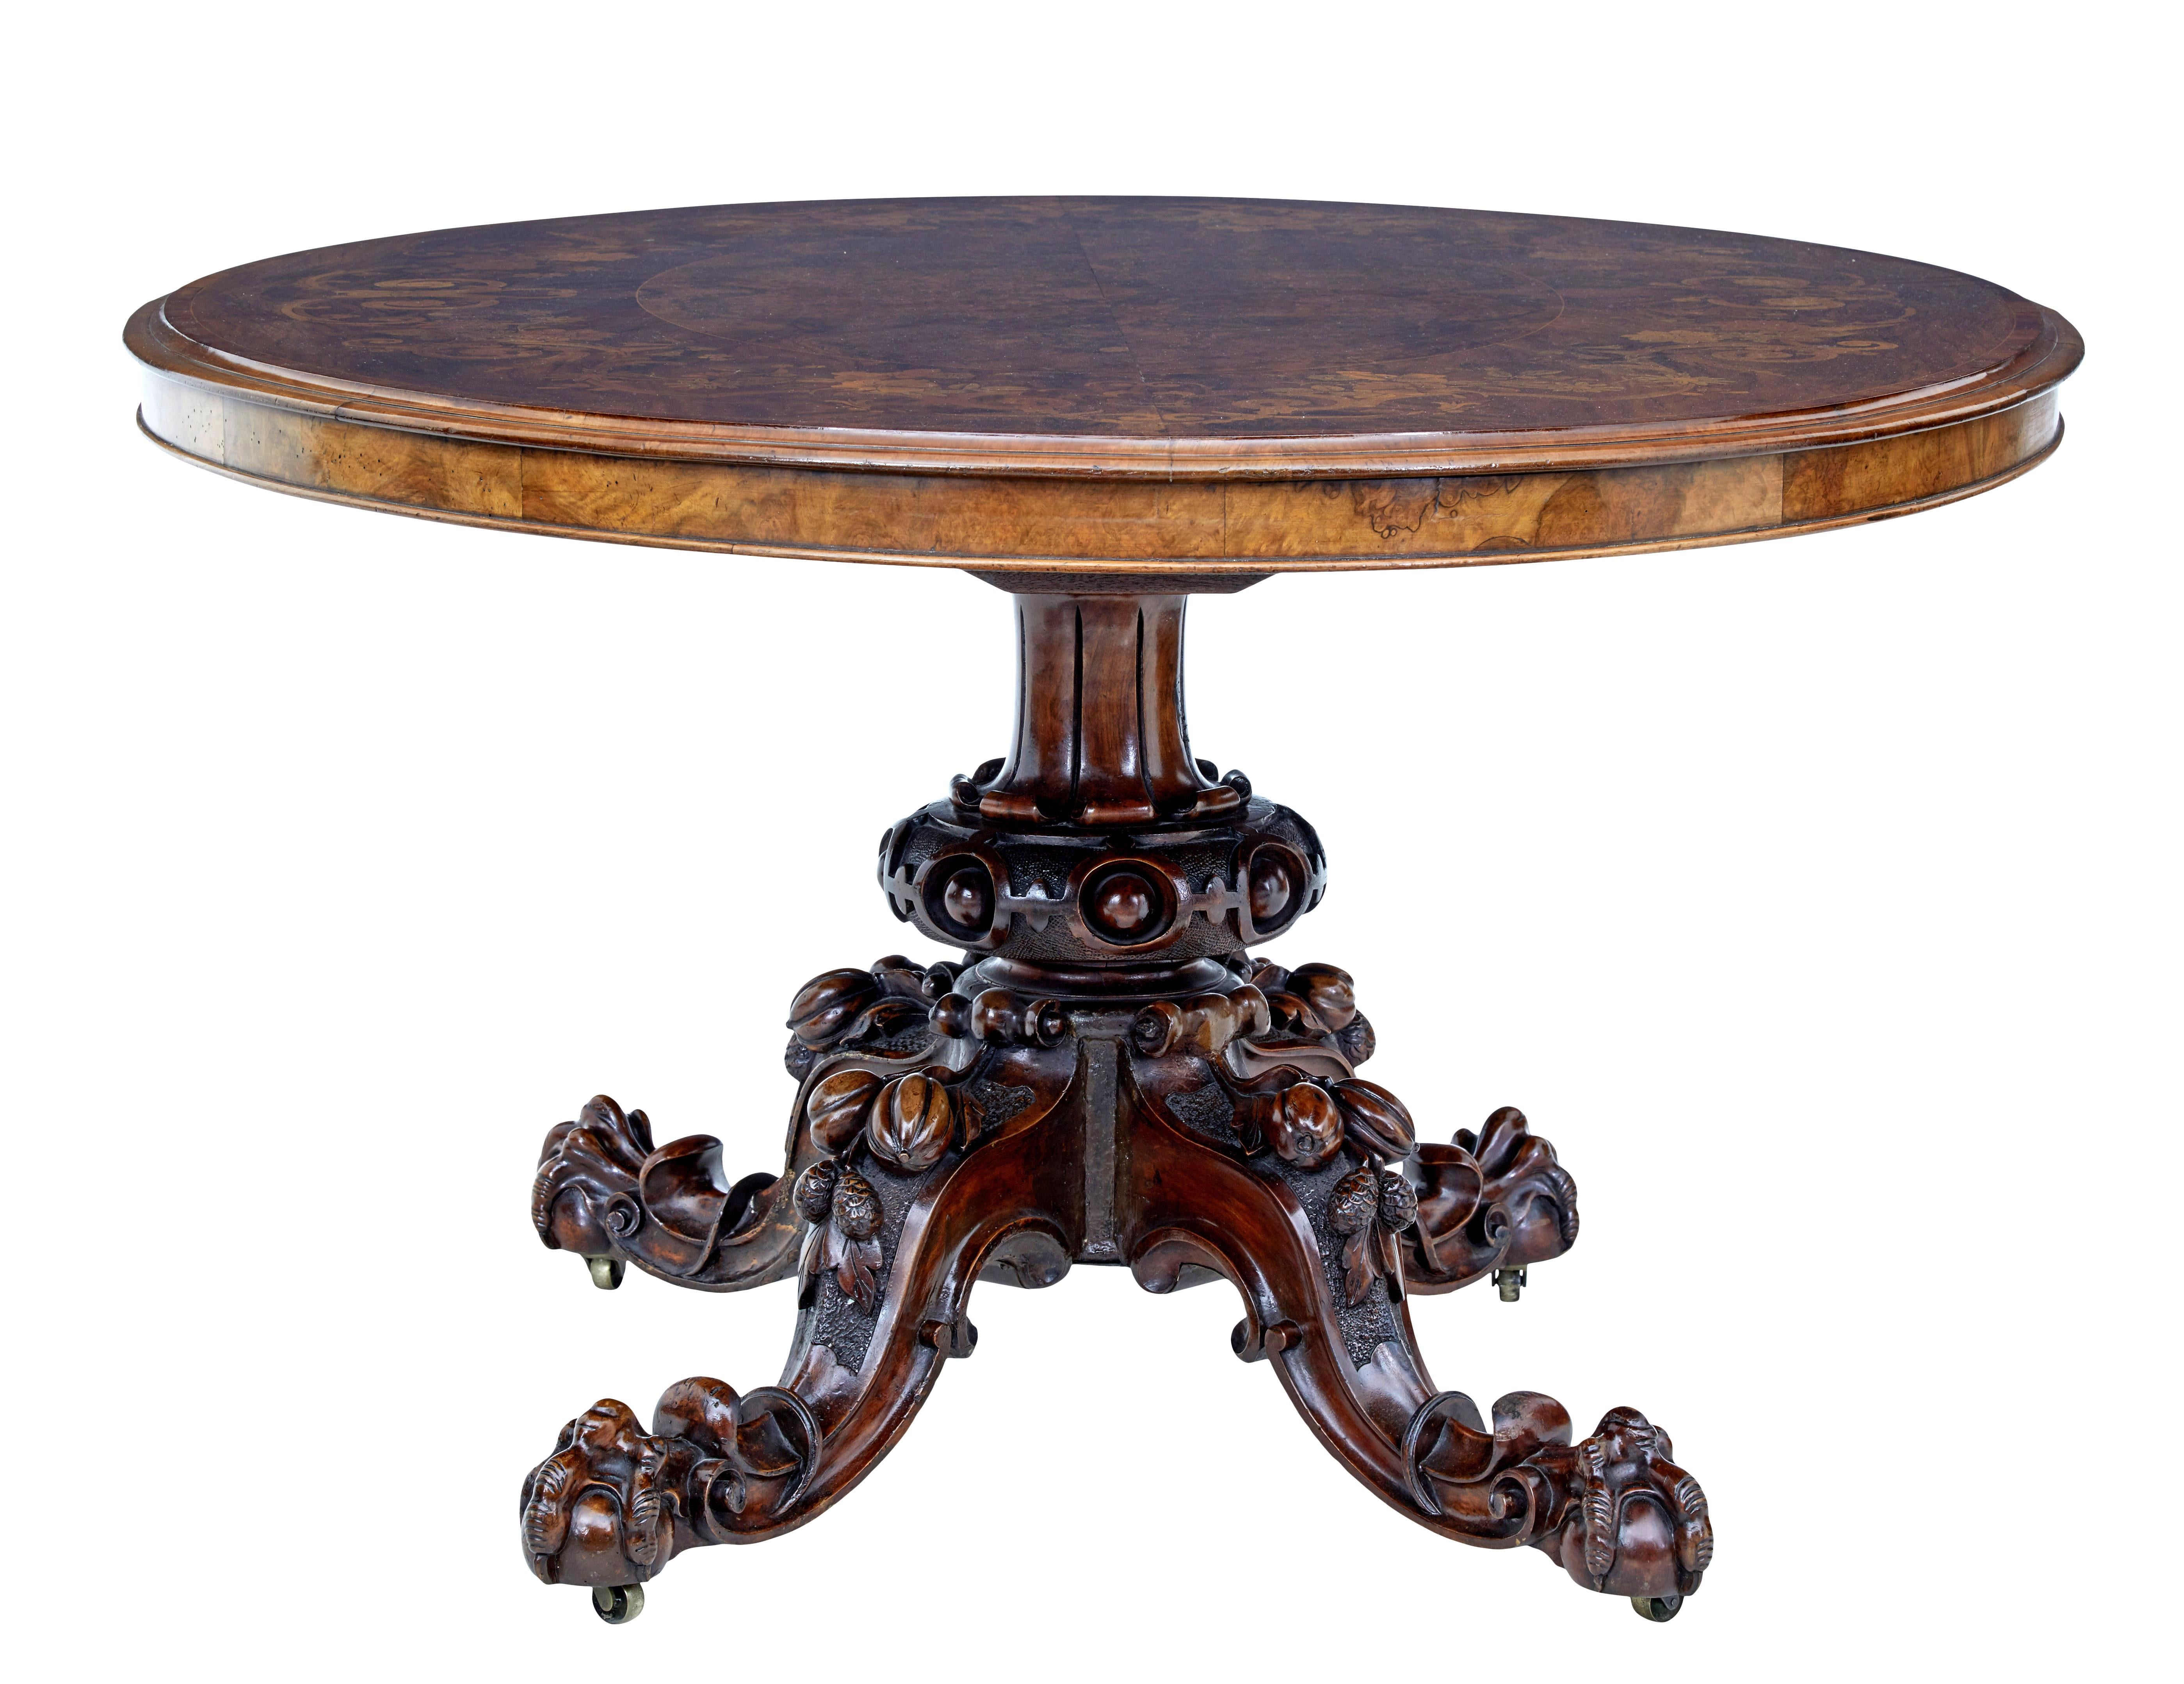 19th century inlaid walnut tilt top table circa 1860

Fine quality oval tilt top occasional table, often known as a loo table due to a popular card game starting in the 18th century.  This table is of slightly more grander scale.

Burr walnut